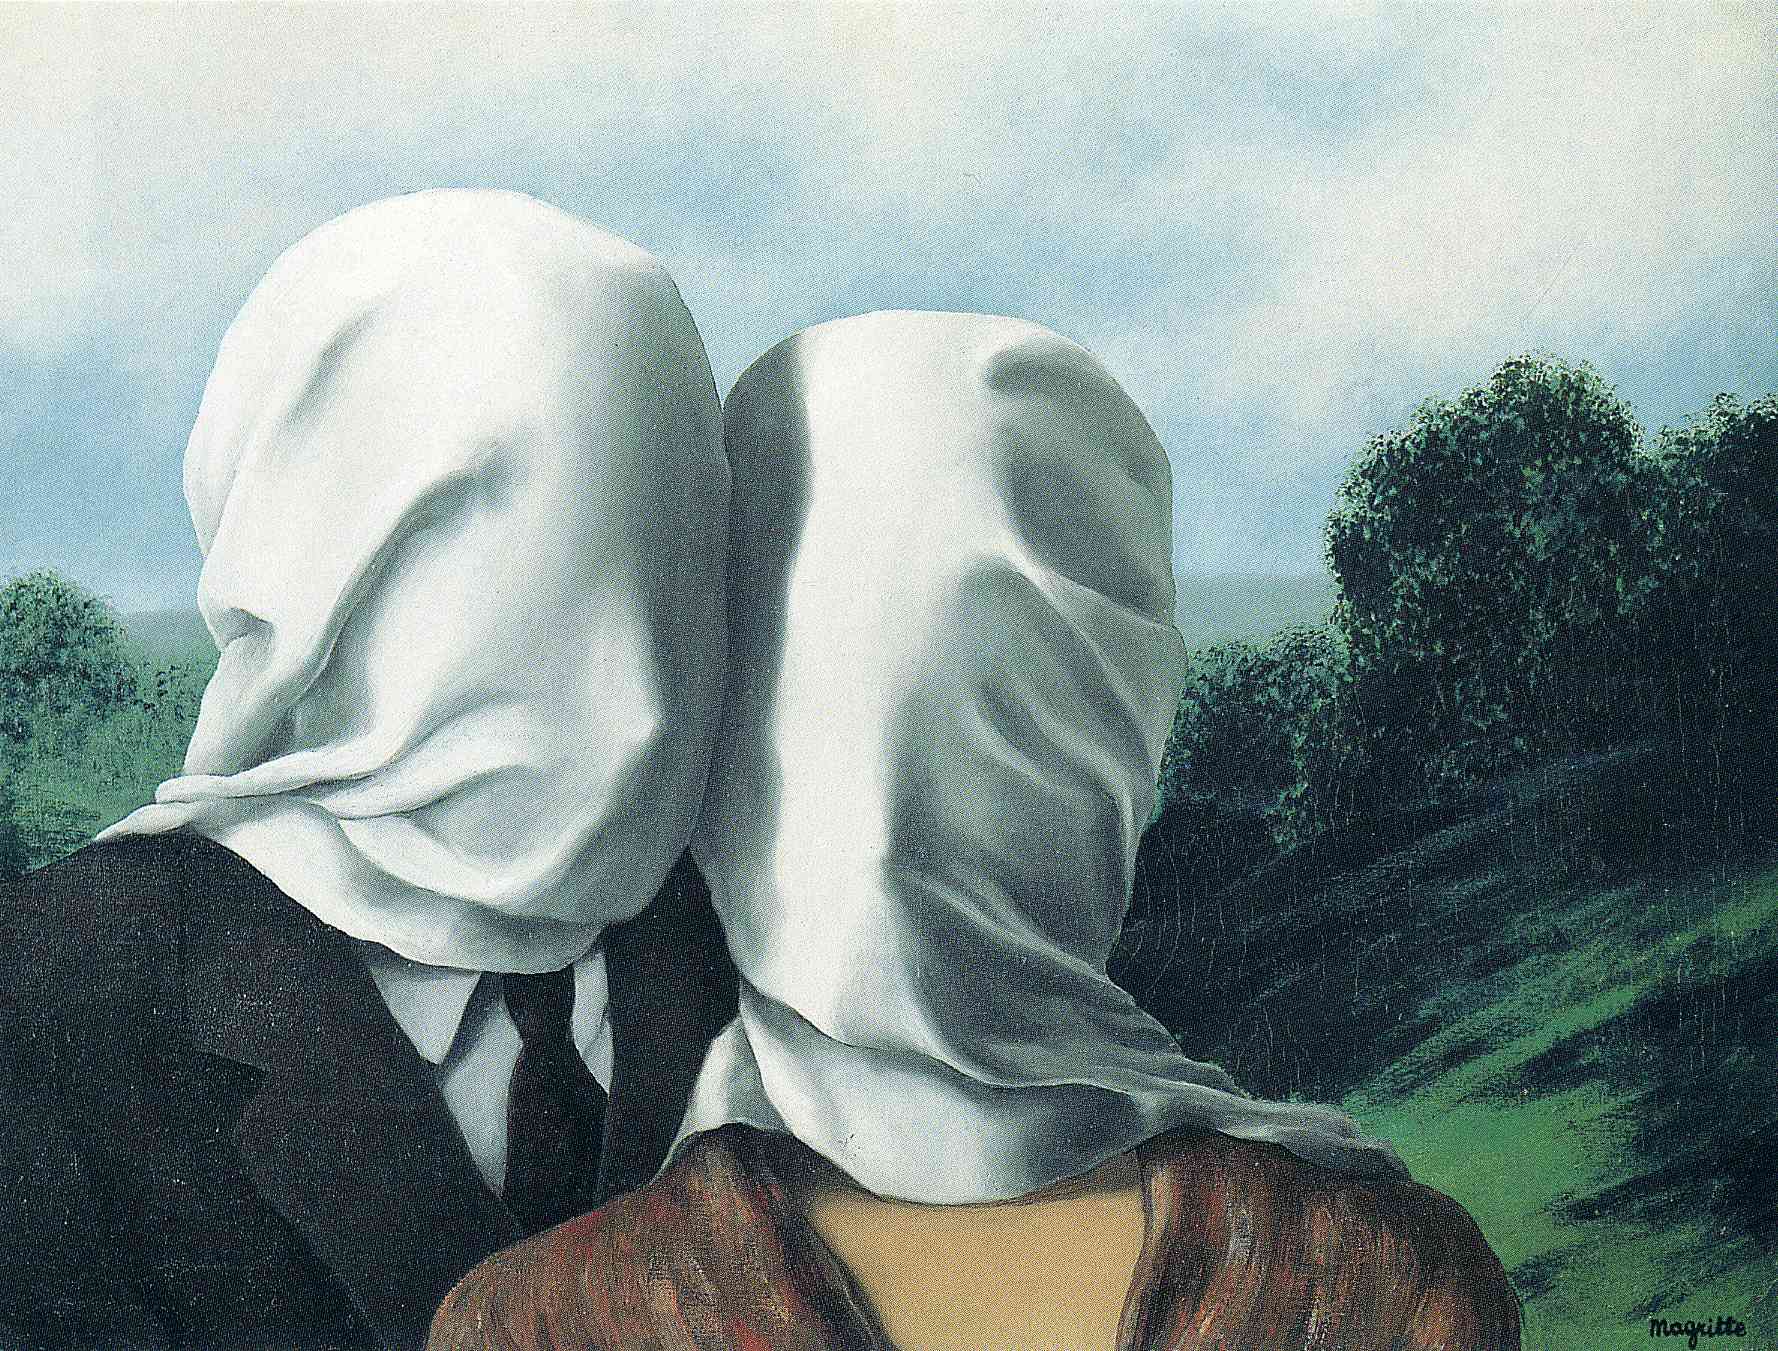 The Lovers by René Magritte - 1928 - 54.2 x 73 cm National Gallery of Australia